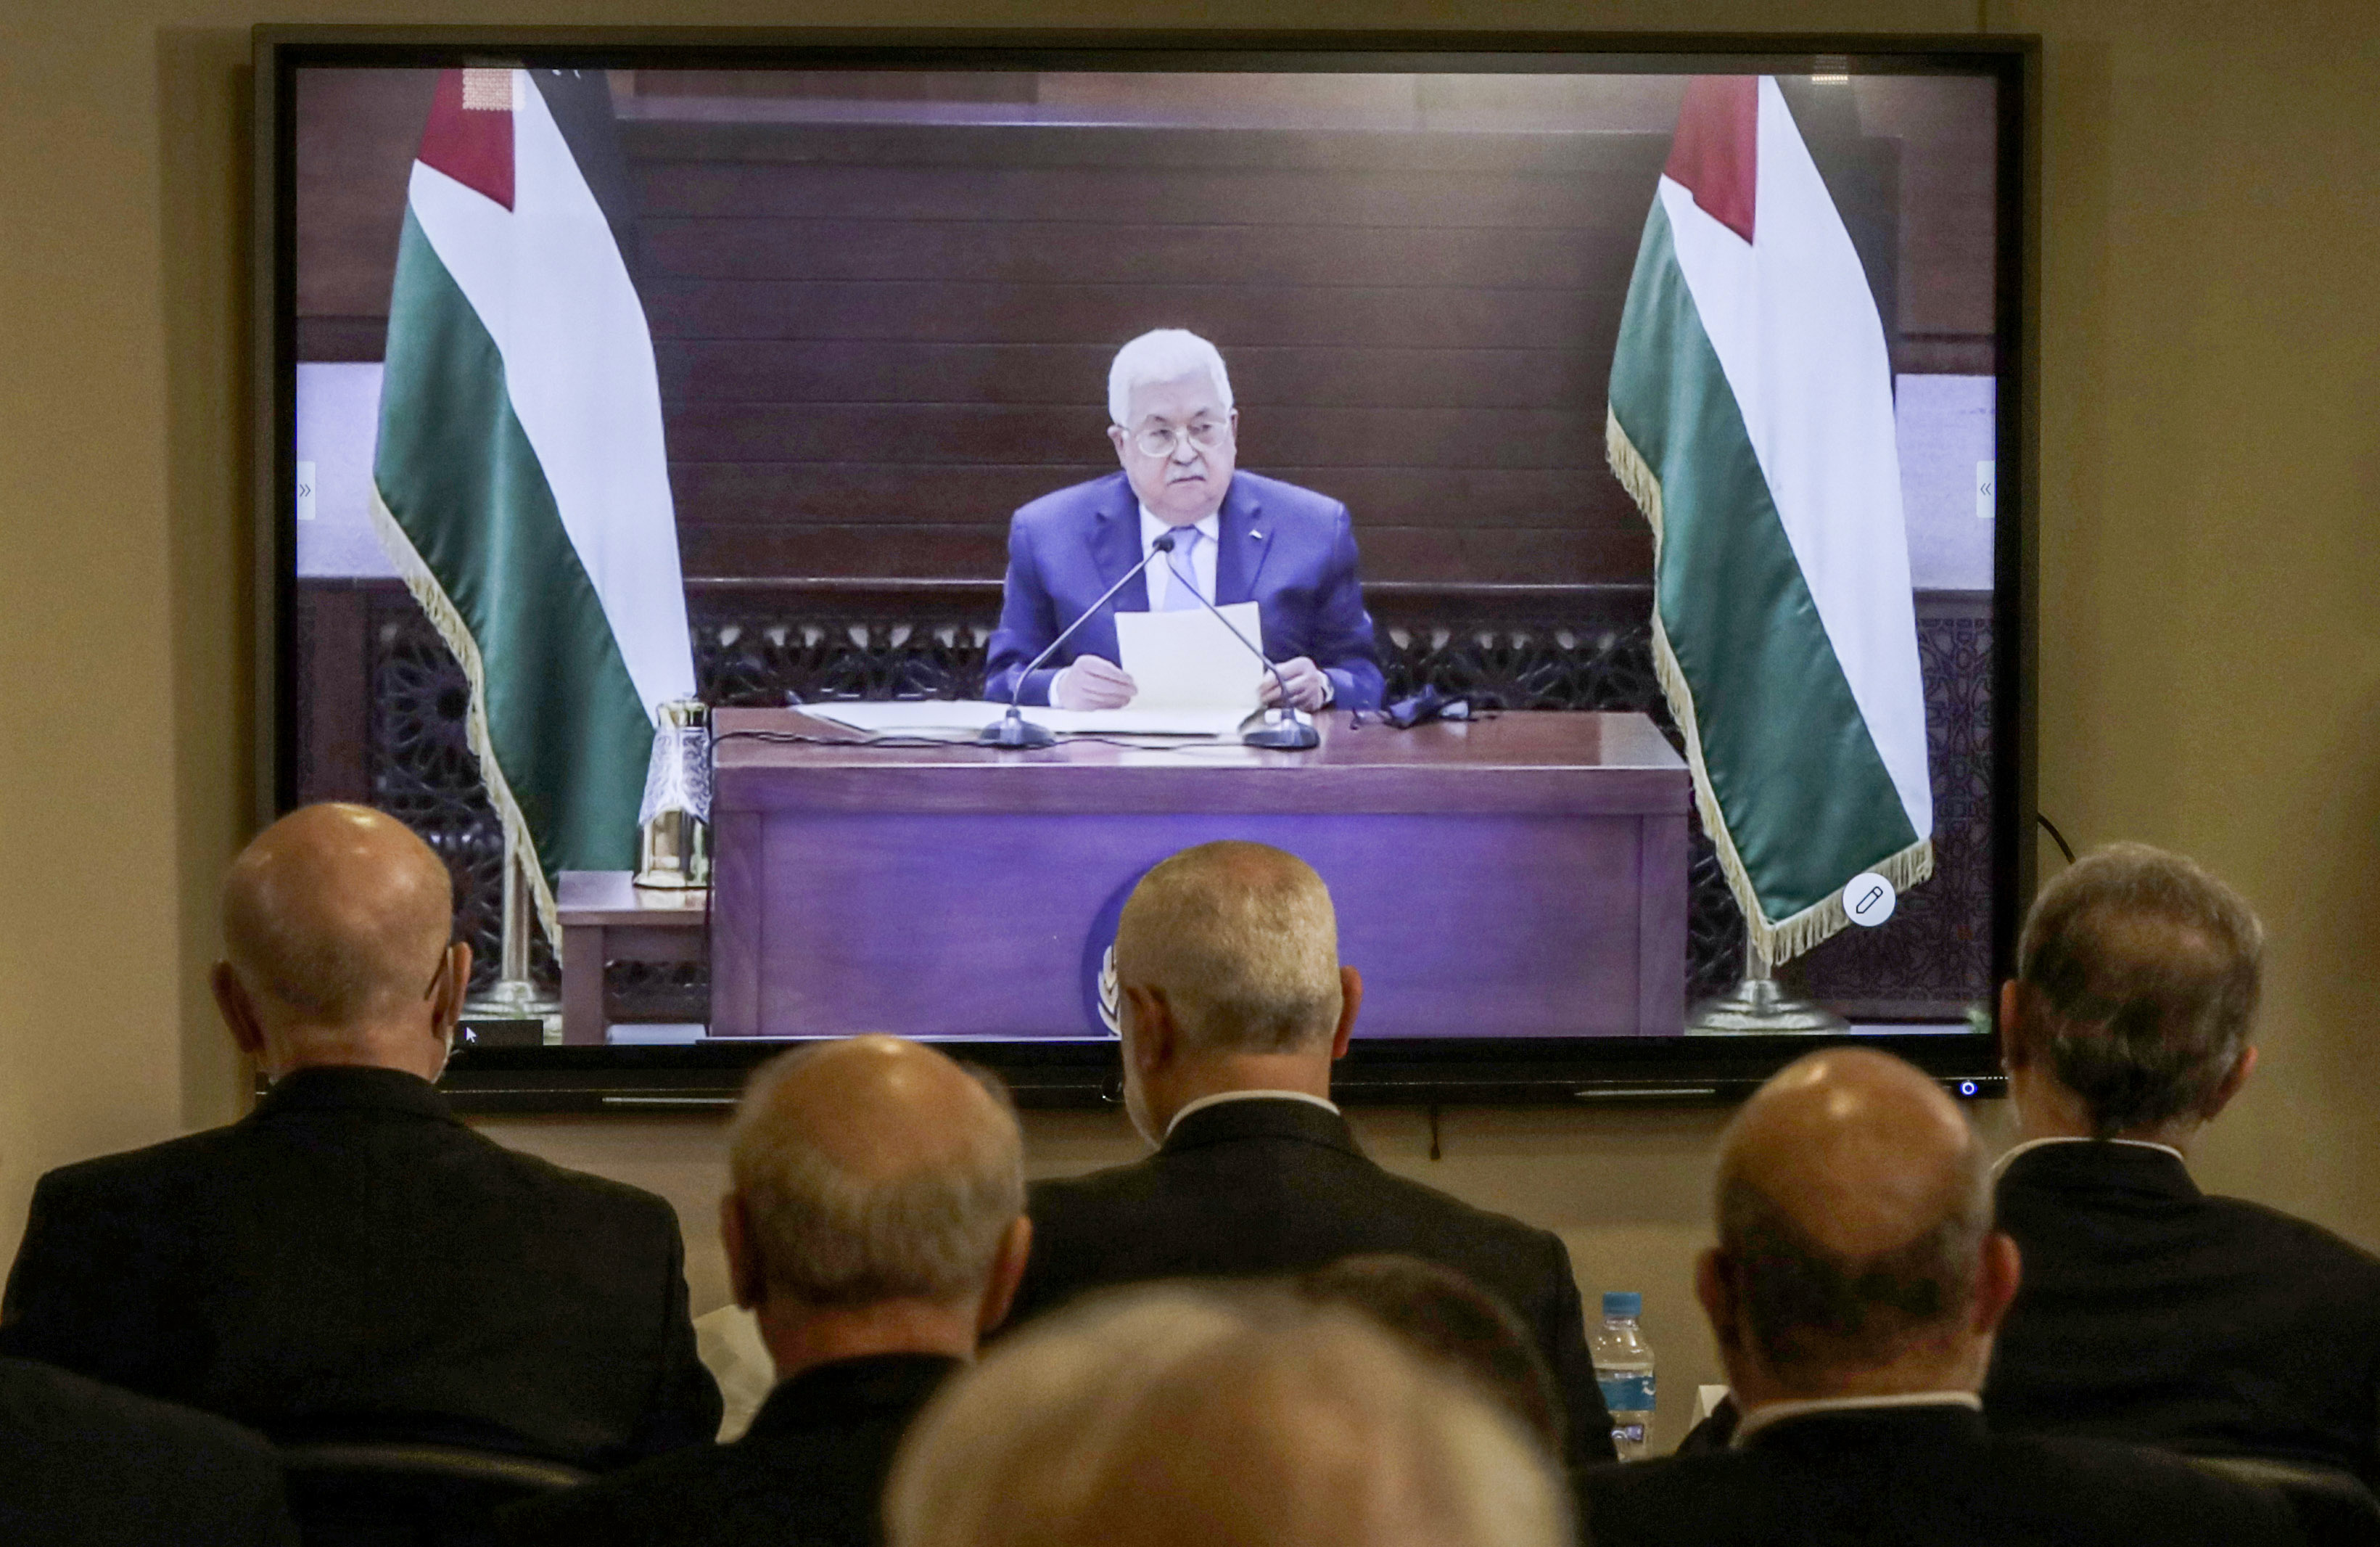 Hamas chief Ismail Haniyeh (C, front row) and representatives of Palestinian factions gather at the Palestinian embassy in Beirut on 3 September 2020 for video conference talks with Palestinian President Mahmoud Abbas (screen) in Ramallah (AFP)